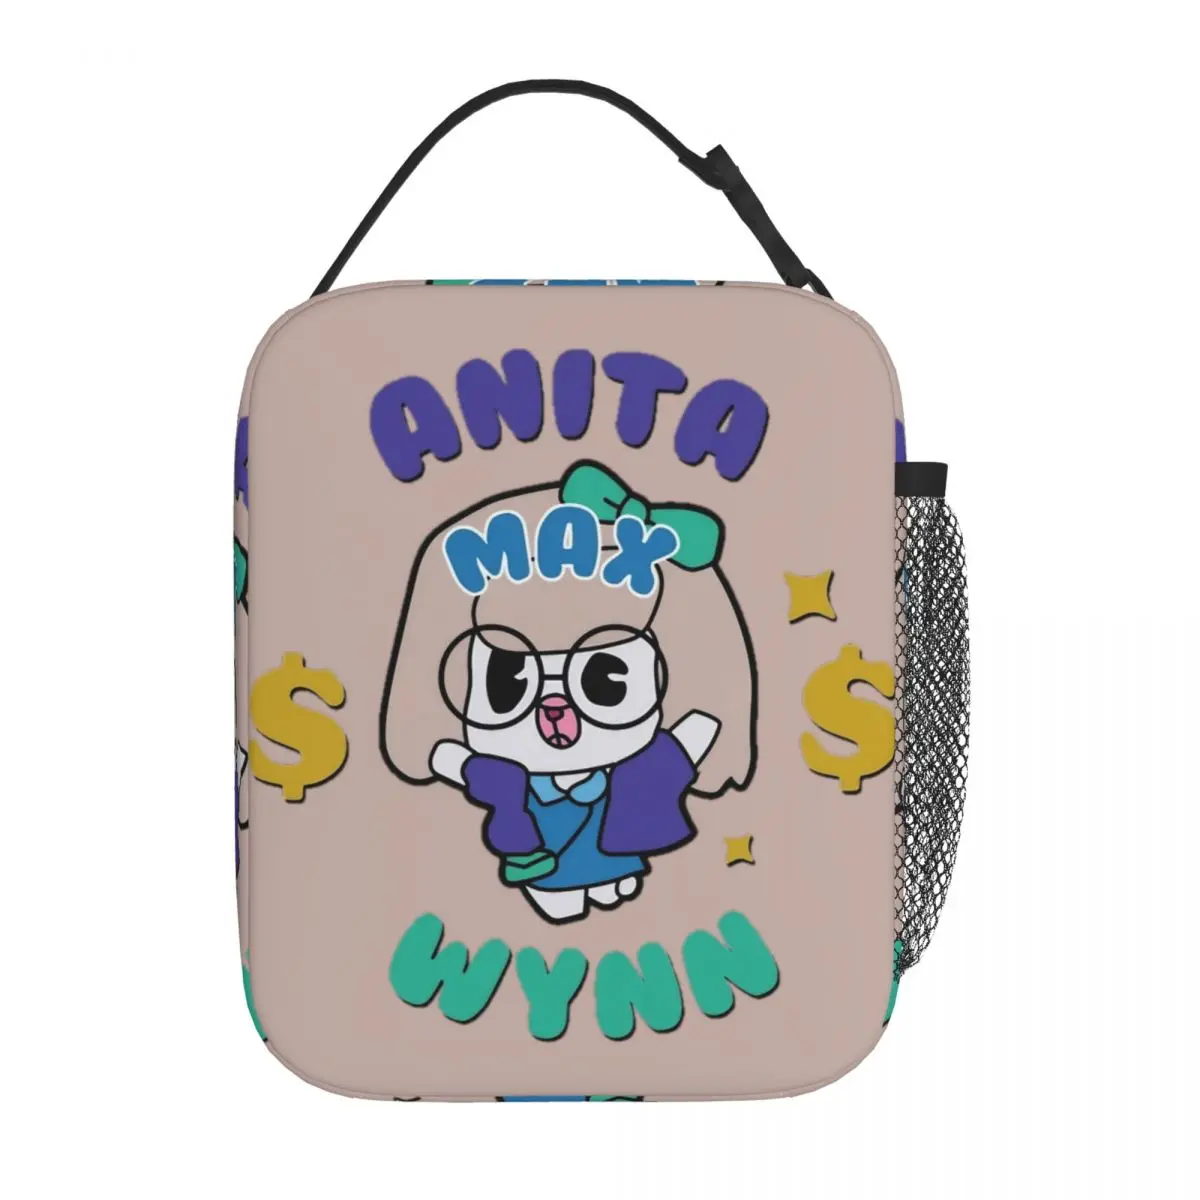 

Anita Max Wynn Funny Meme Thermal Insulated Lunch Bag for Office Kawaii Portable Food Bag Men Women Cooler Thermal Lunch Box